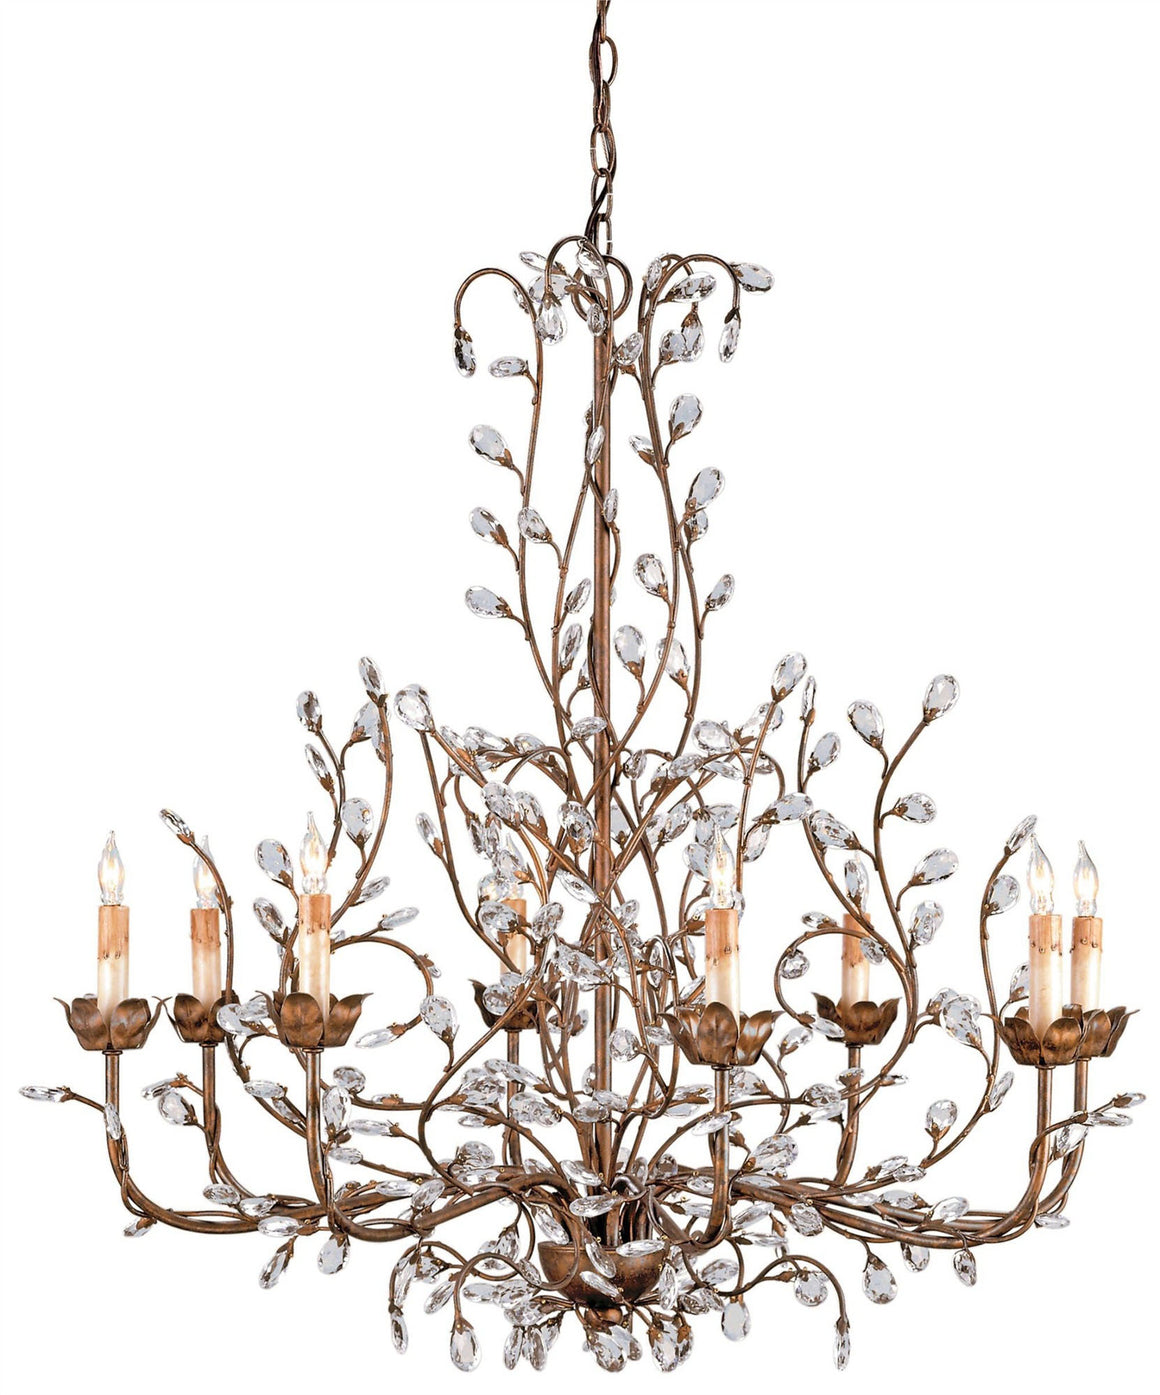 Currey and Company Crystal Bud Cupertino Large Chandelier